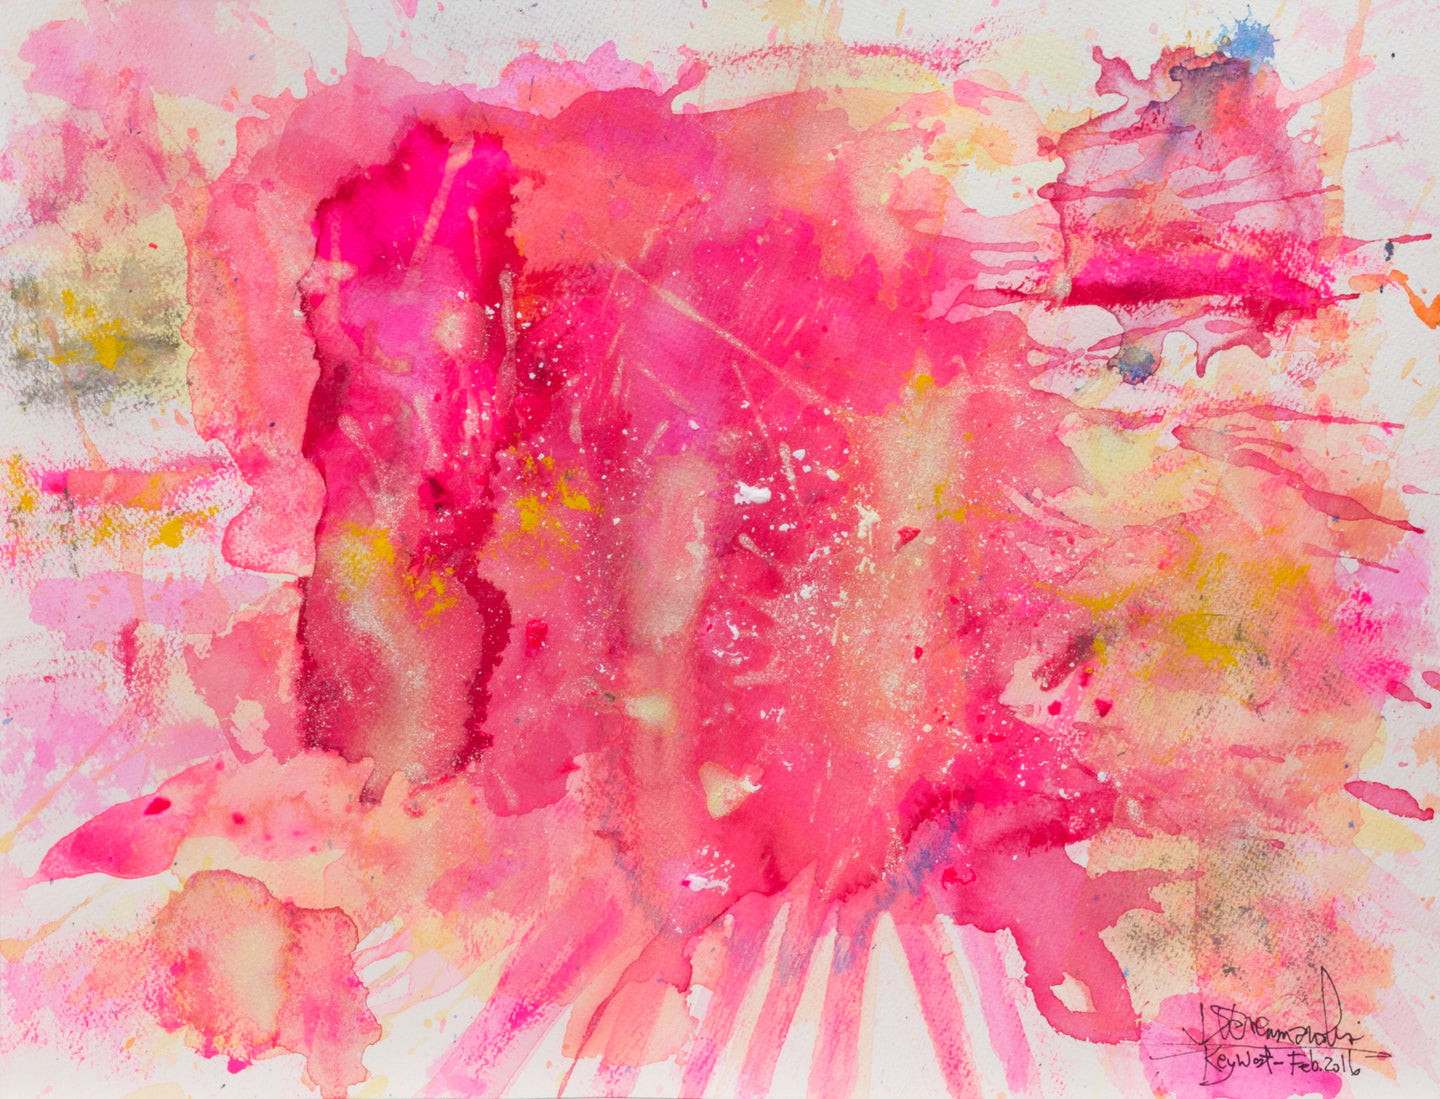 J. Steven Manolis, Flamingo-Key West, 1832-2016-1216.04, watercolor, gouache and acrylic painting on Arches paper, 12 x 16 inches, Pink Abstract Art, Tropical Watercolor paintings for sale at Manolis Projects Art Gallery, Miami, Fl